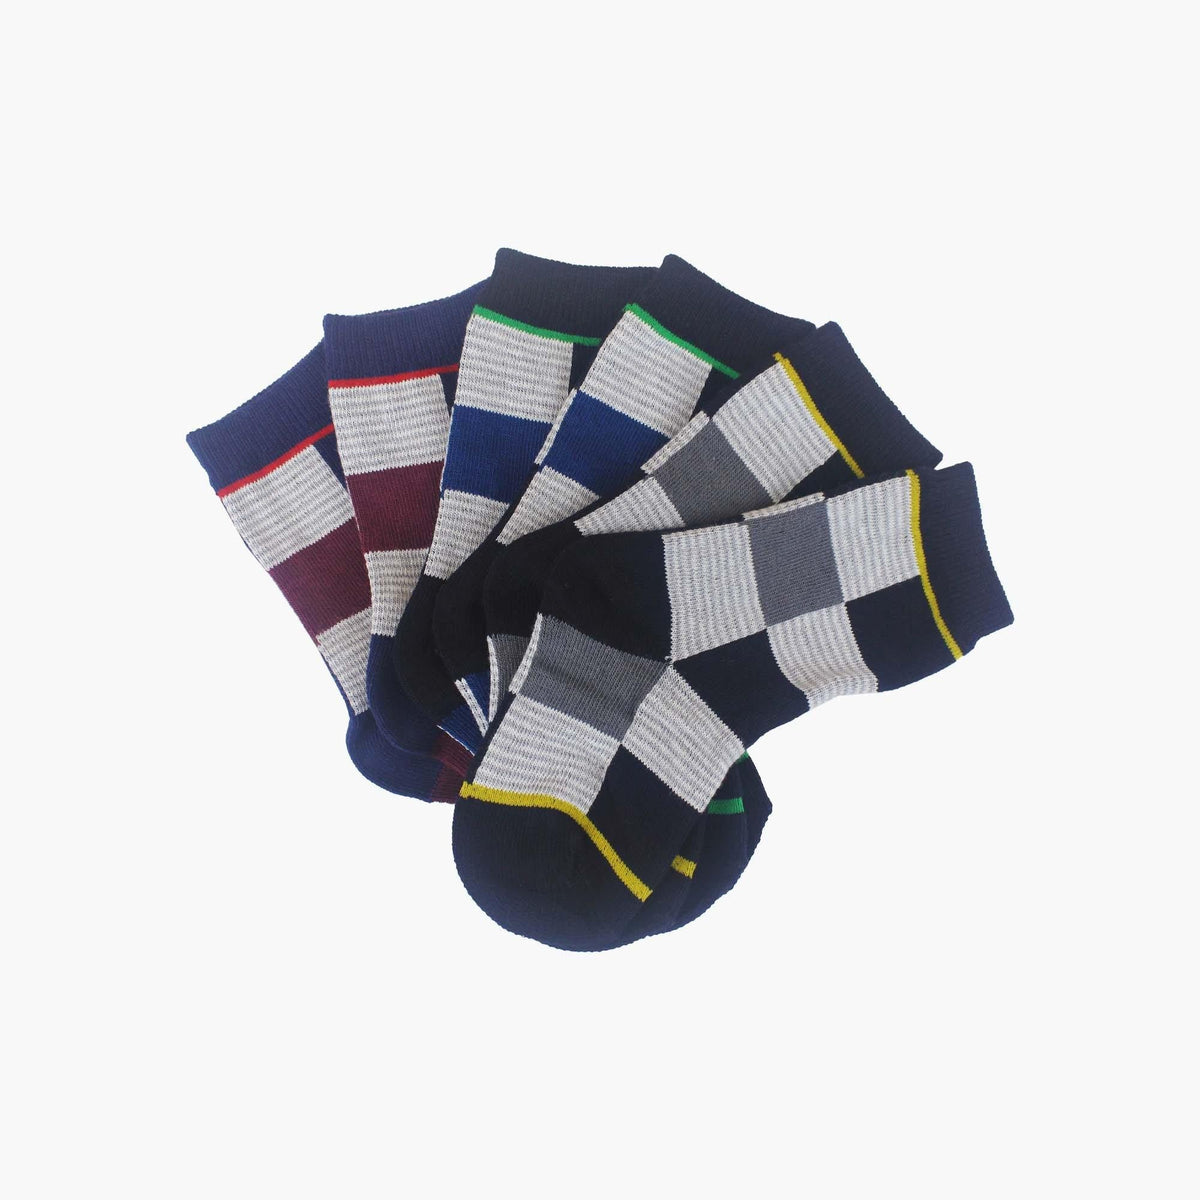 3 Pack Organic Cotton Charcoal, Navy and Maroon Checkered Square Baby Swanky Socks - SwankySocks